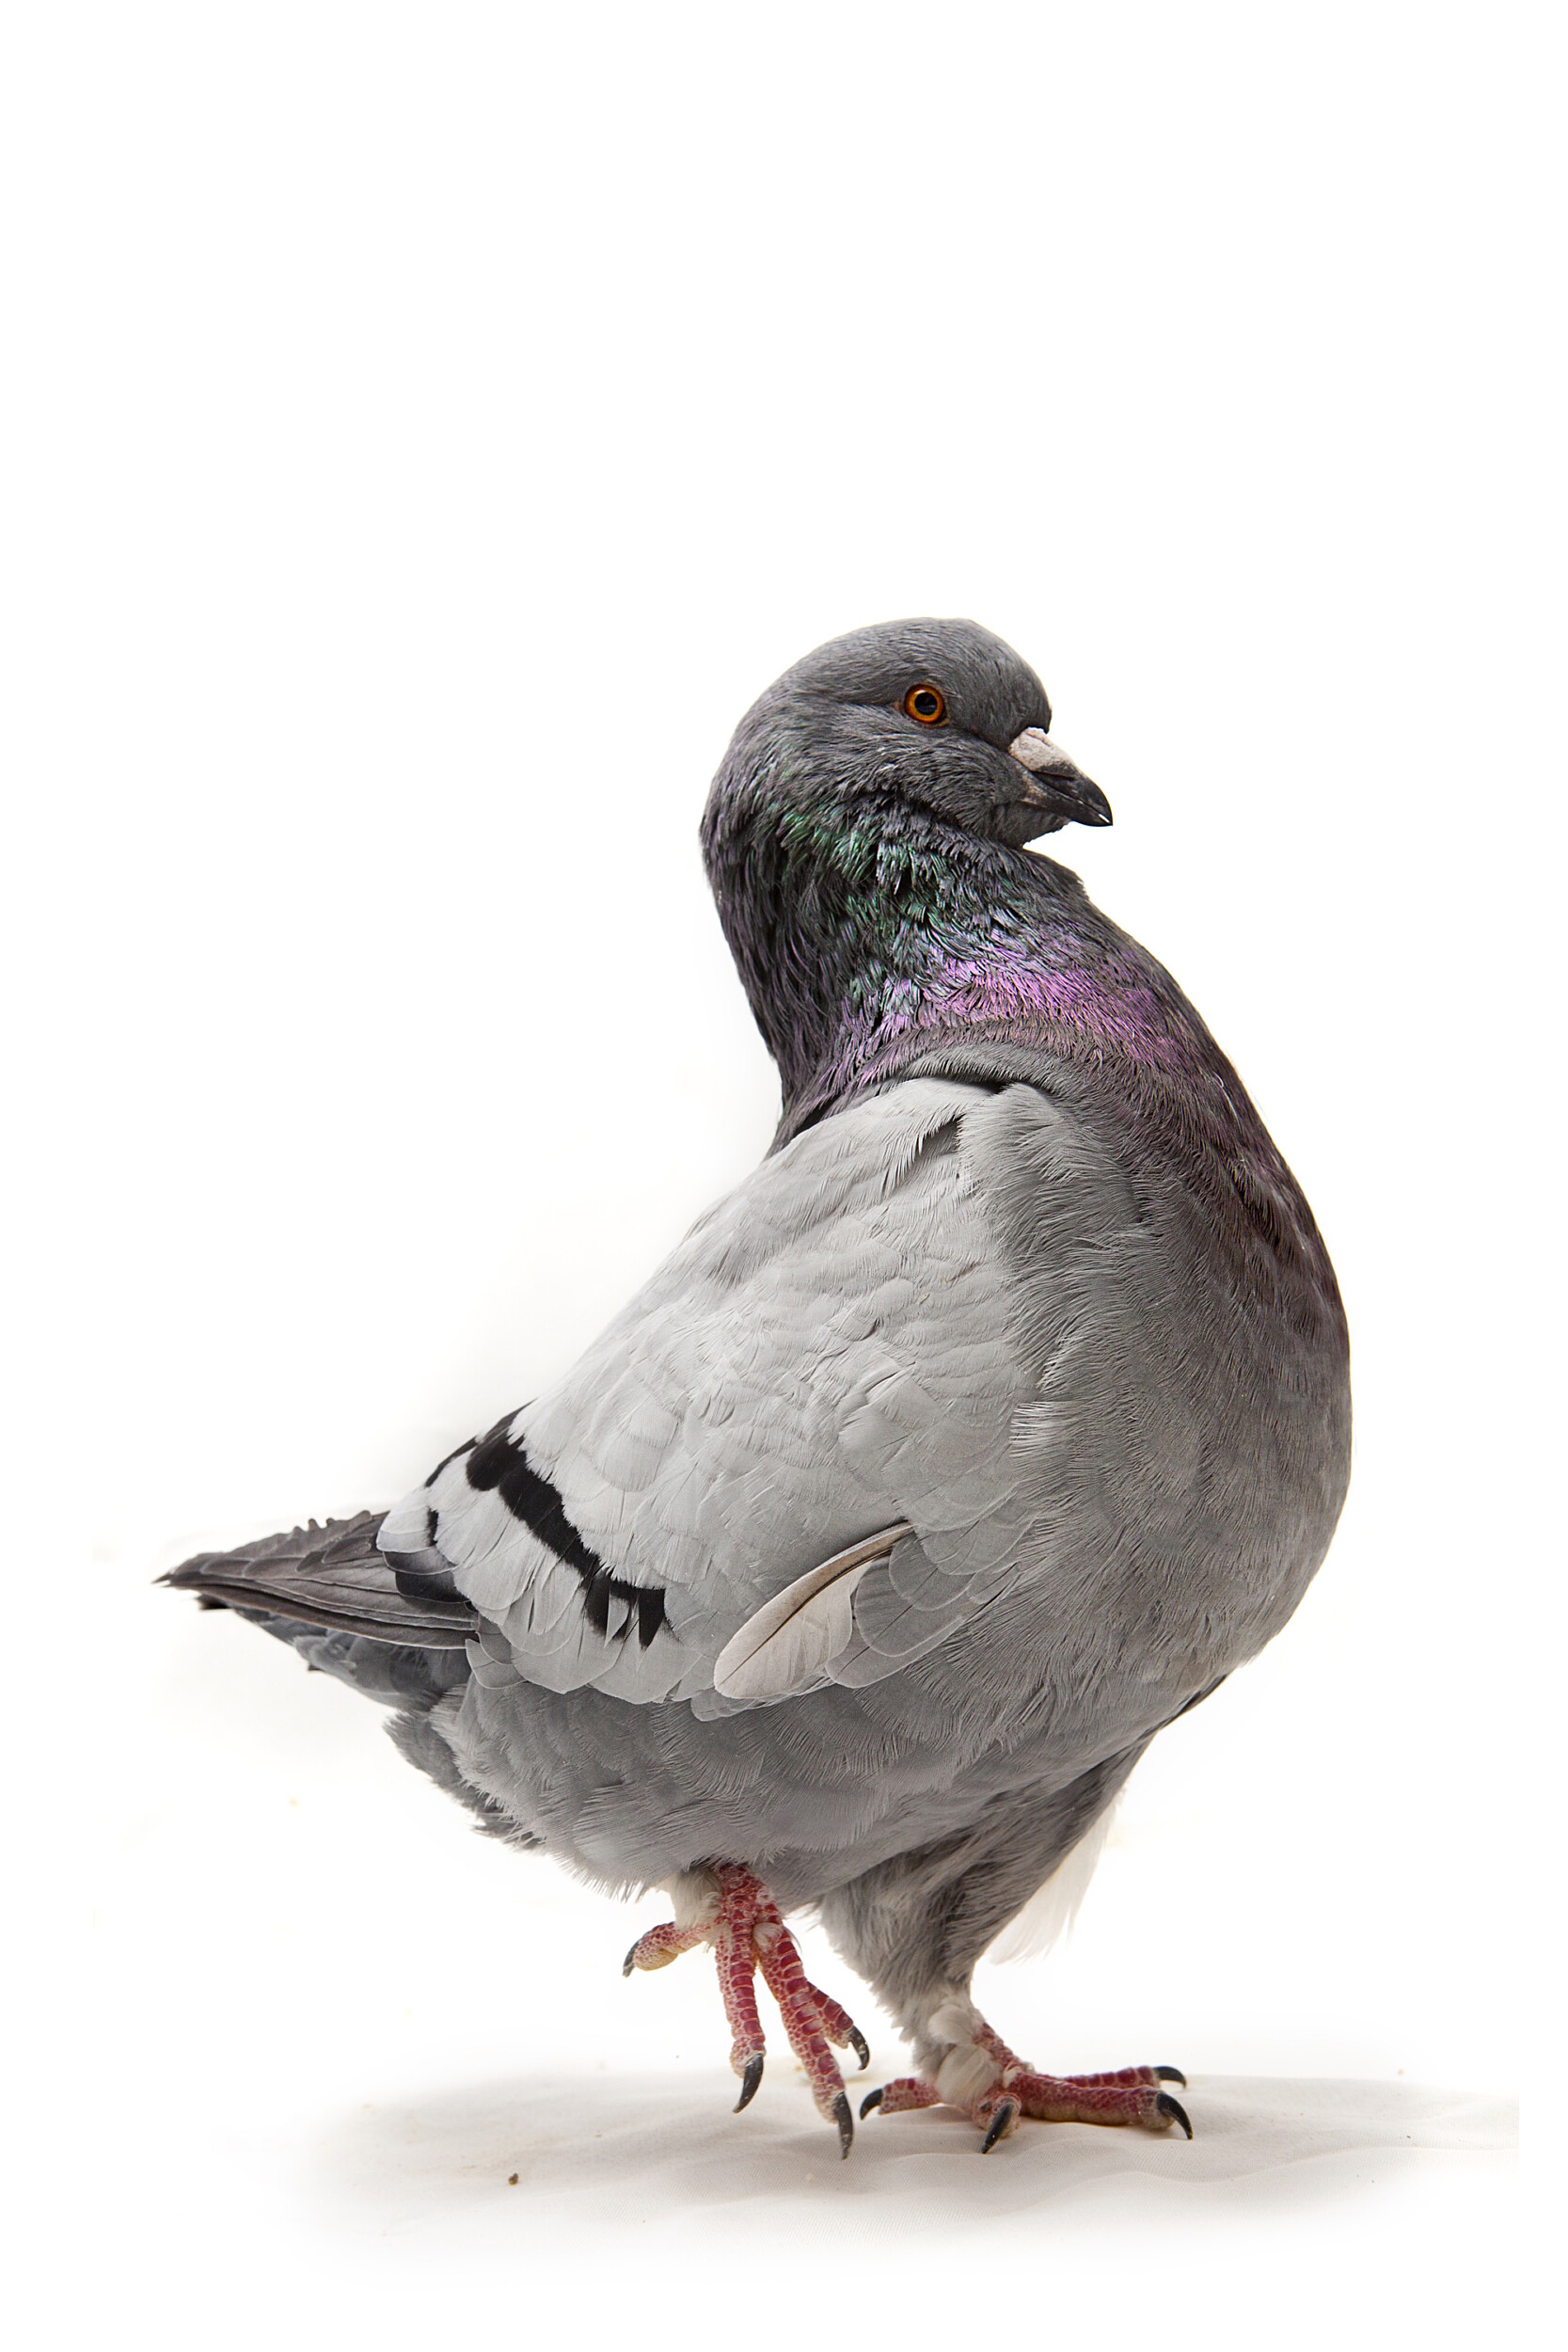 Fancy Pigeon: King Pigeon - The King pigeon is known for its large size. While there are a few show varieties, it is more suitable for eating and squab production. It is a breed that originated in the United States during the 1890s but is now used world-wide as a utility bird.